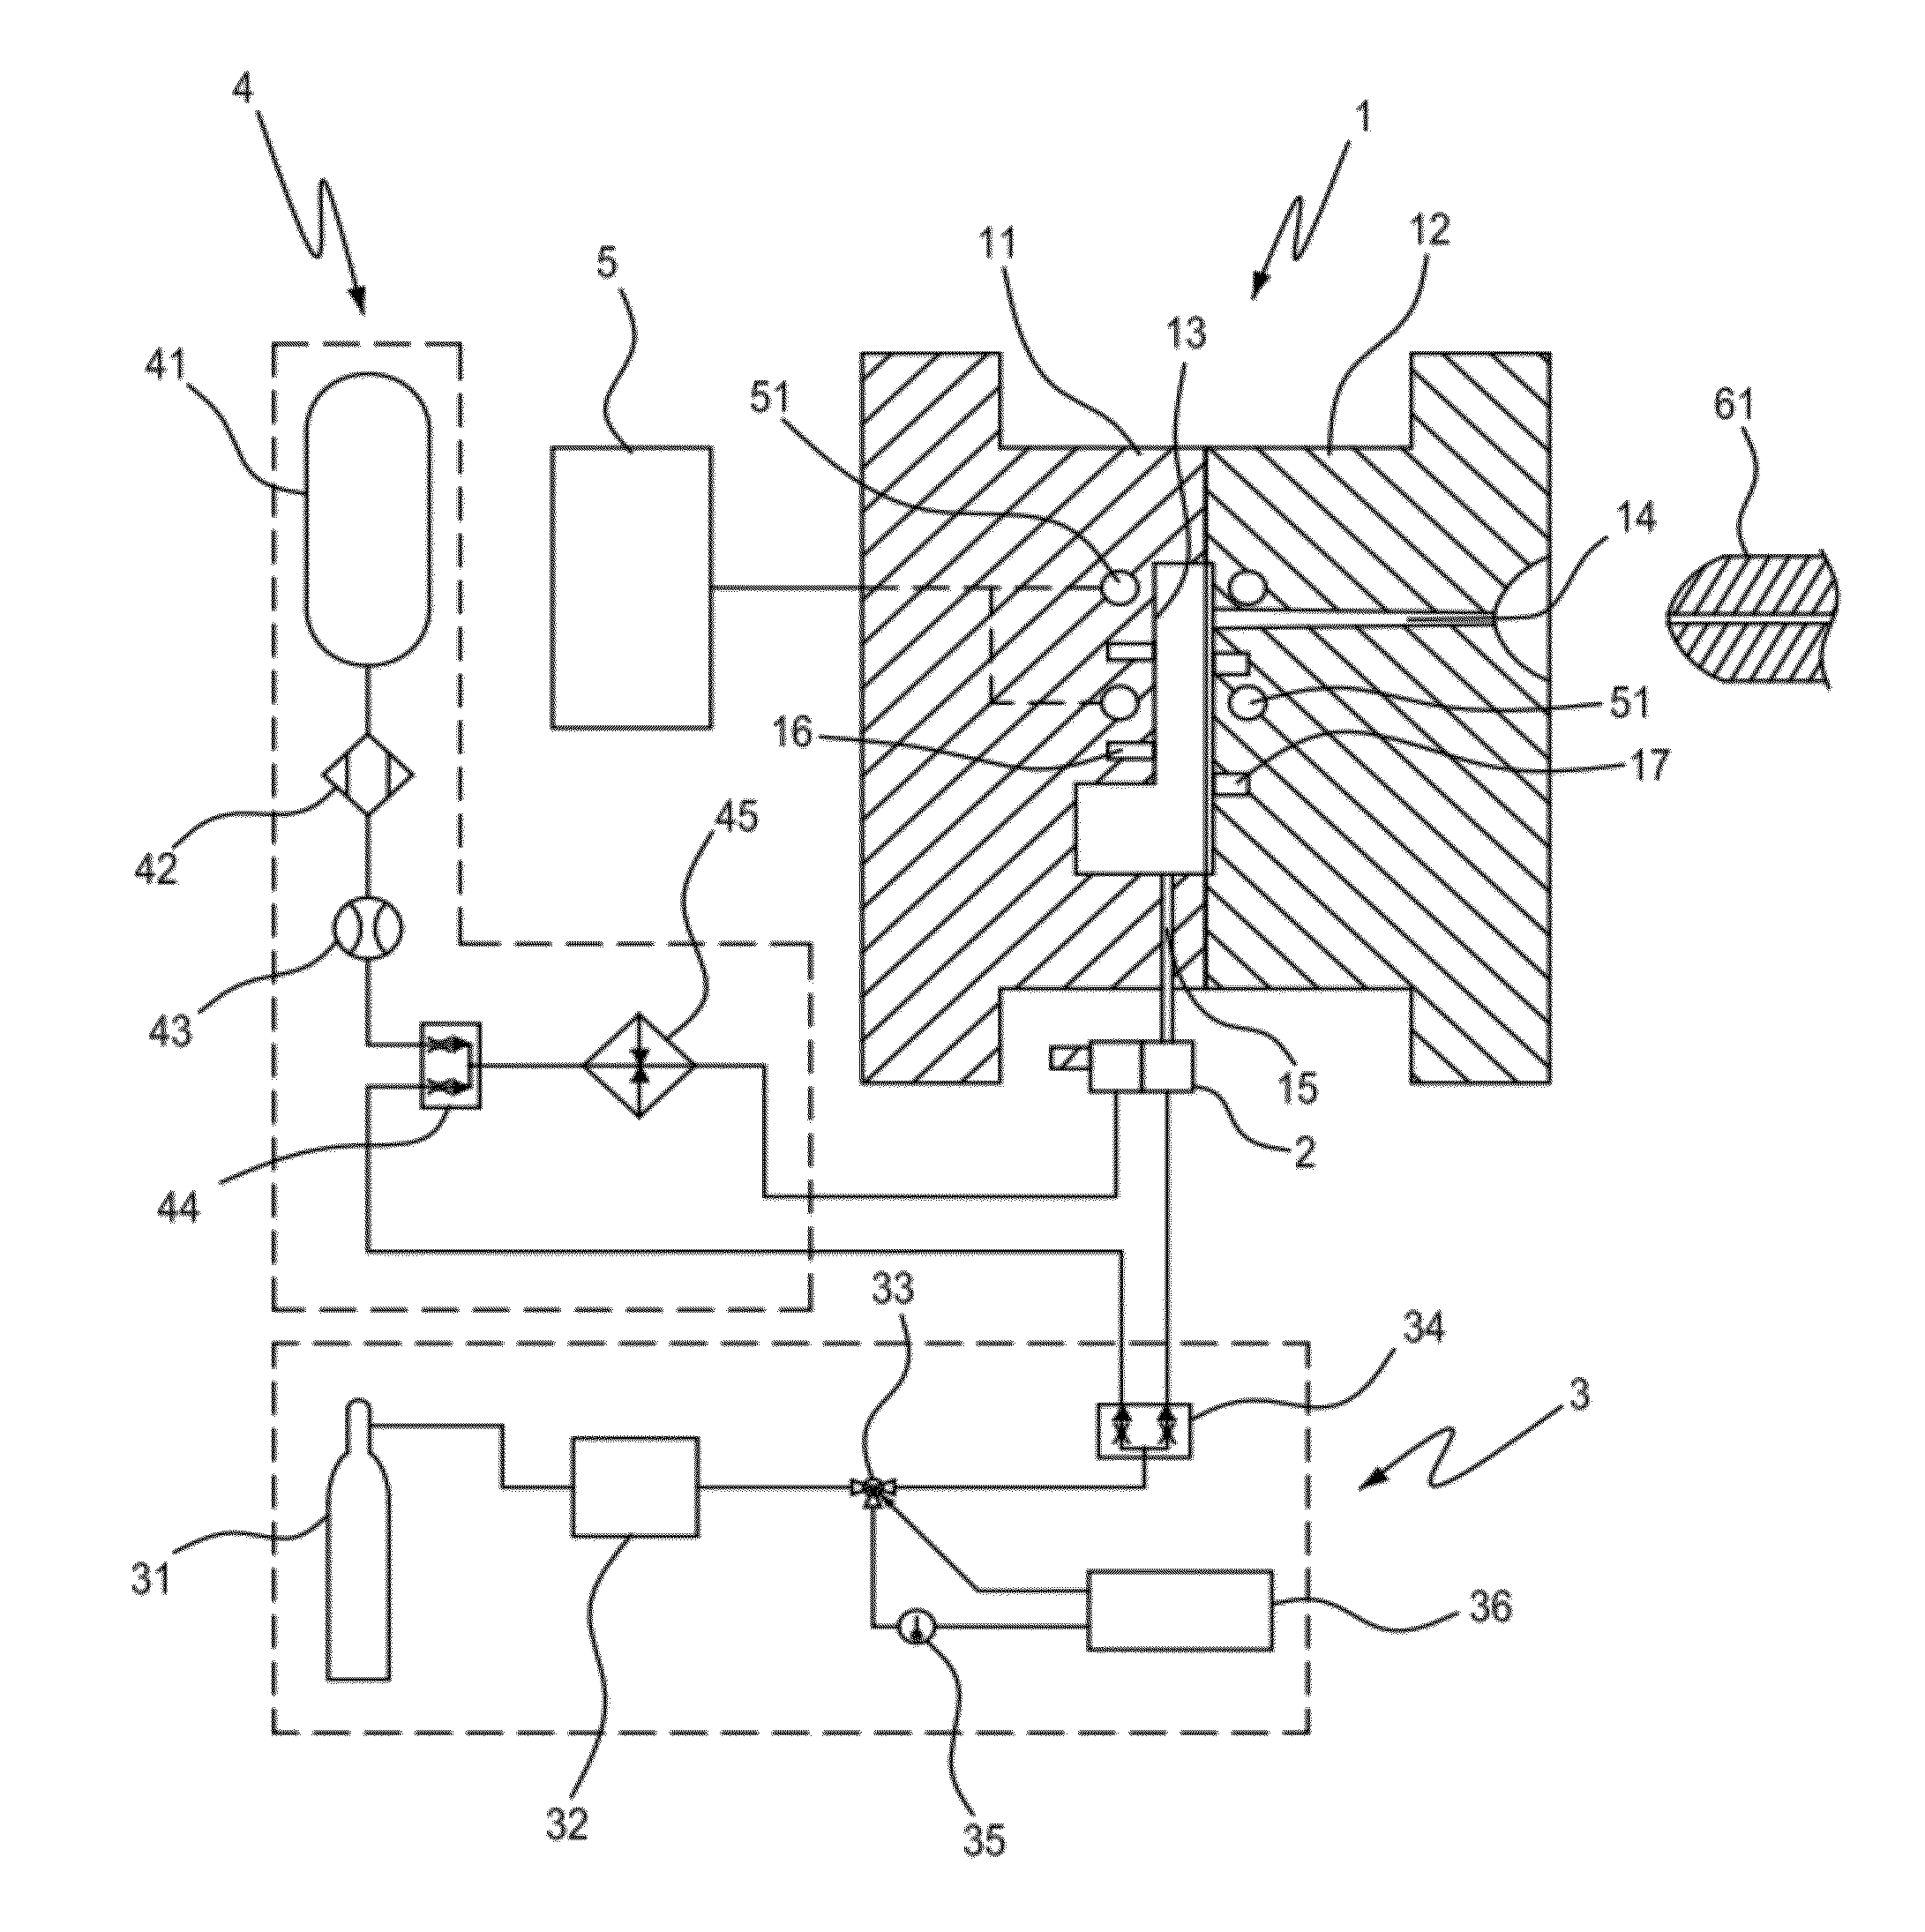 Apparatus for controlling counterpressure and temperature in mold cavity